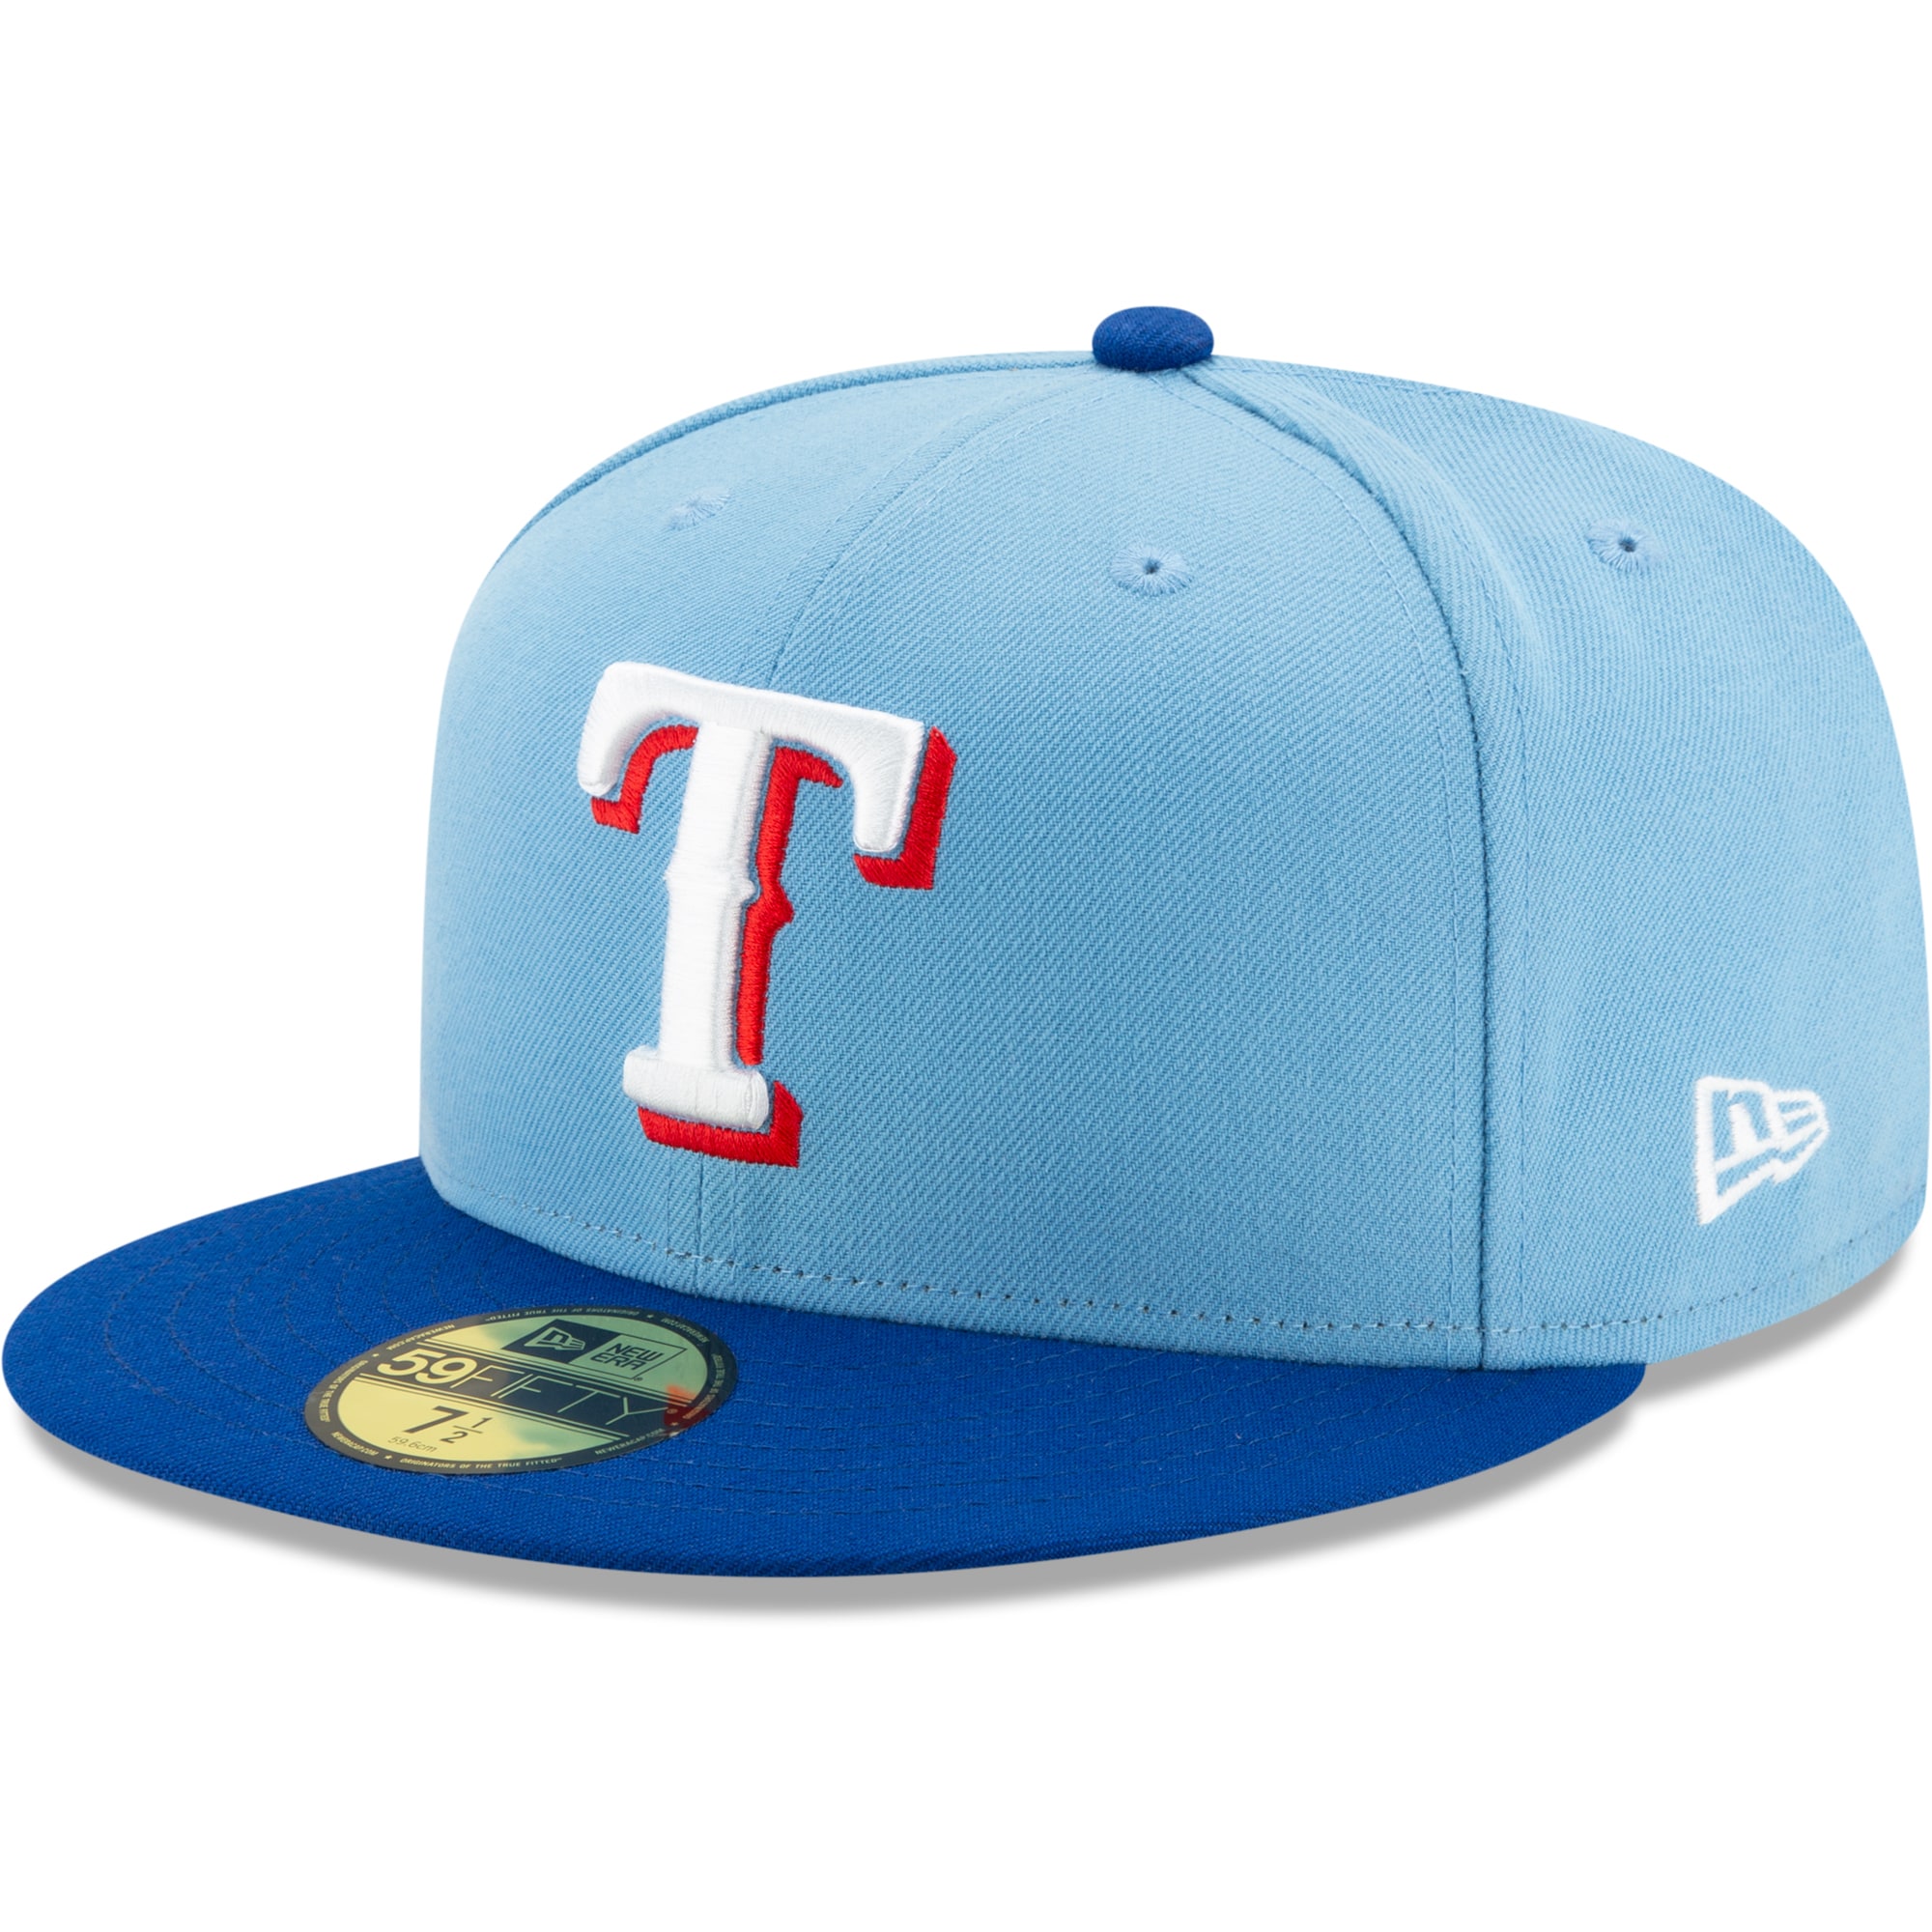 Men's New Era Texas Rangers Light Blue/Royal On-Field Authentic Collection 59FIFTY Fitted Hat - image 1 of 4